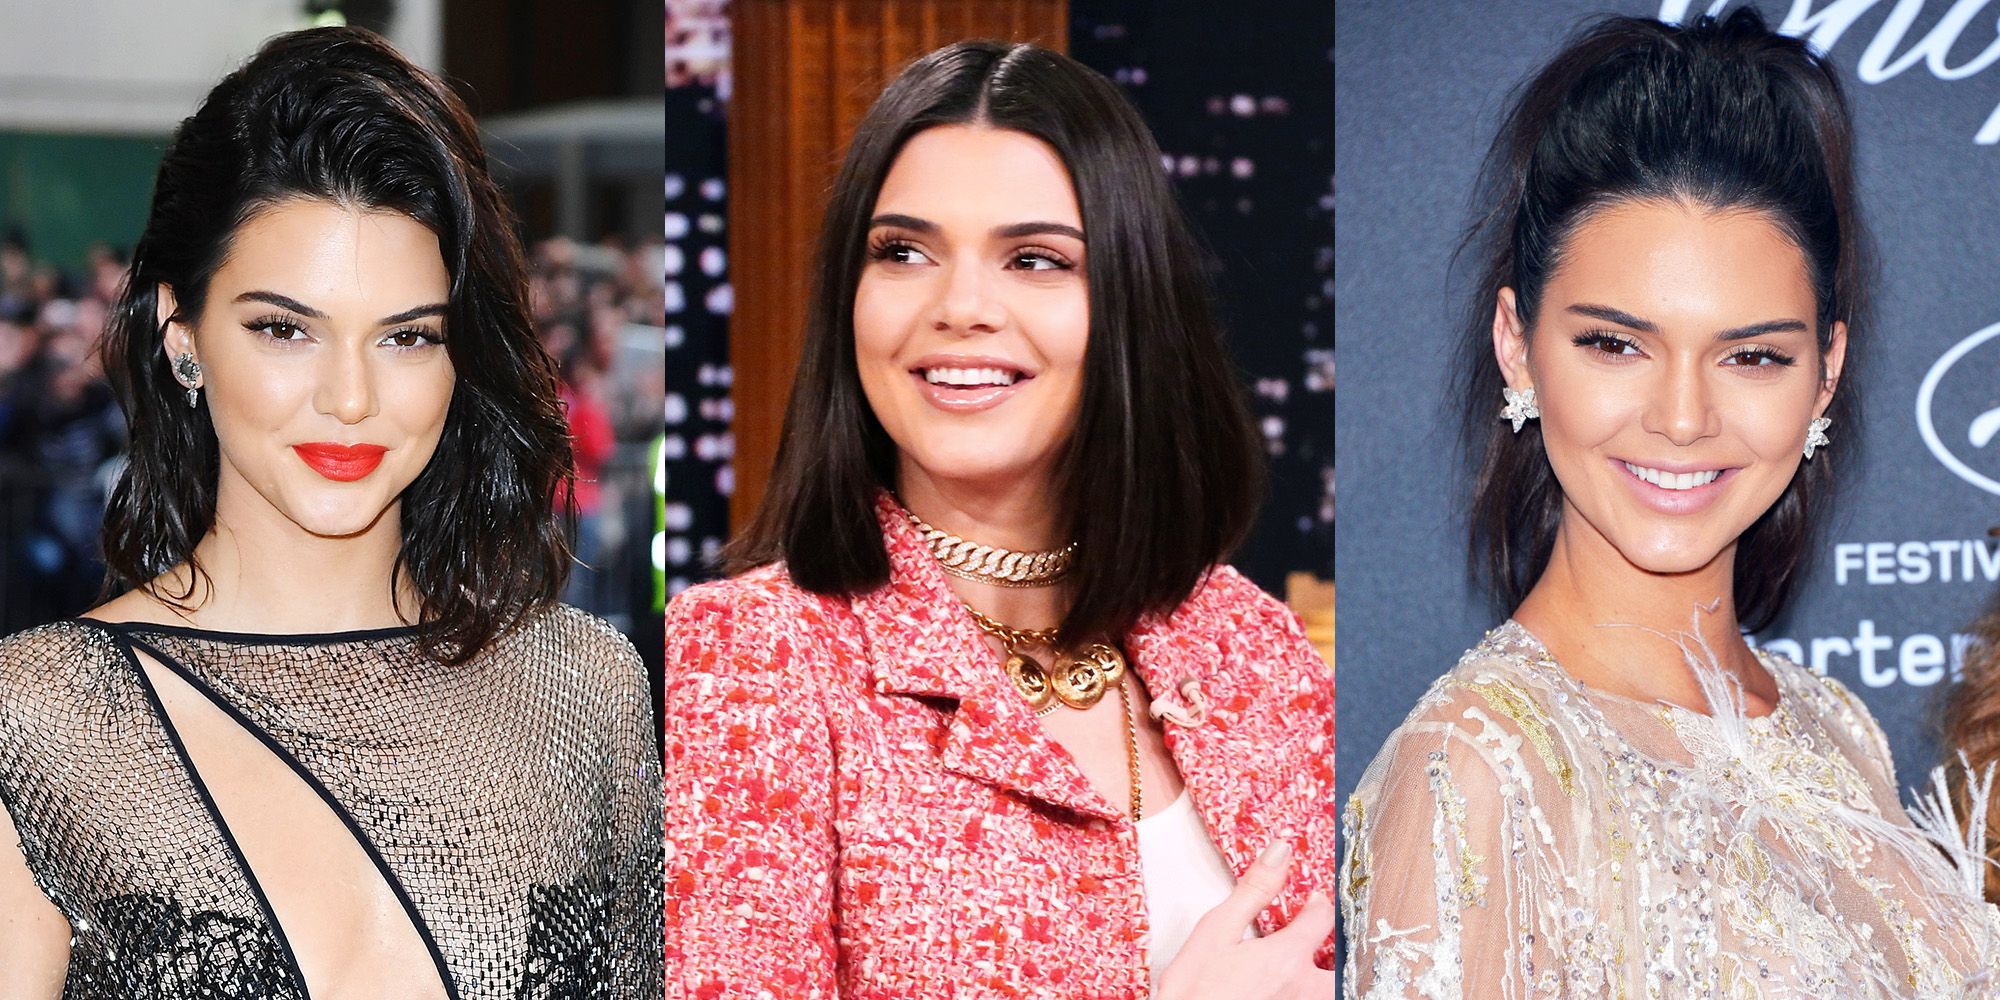 Here Are More Photos Of Kendall Jenners Perfect MidLength Hair